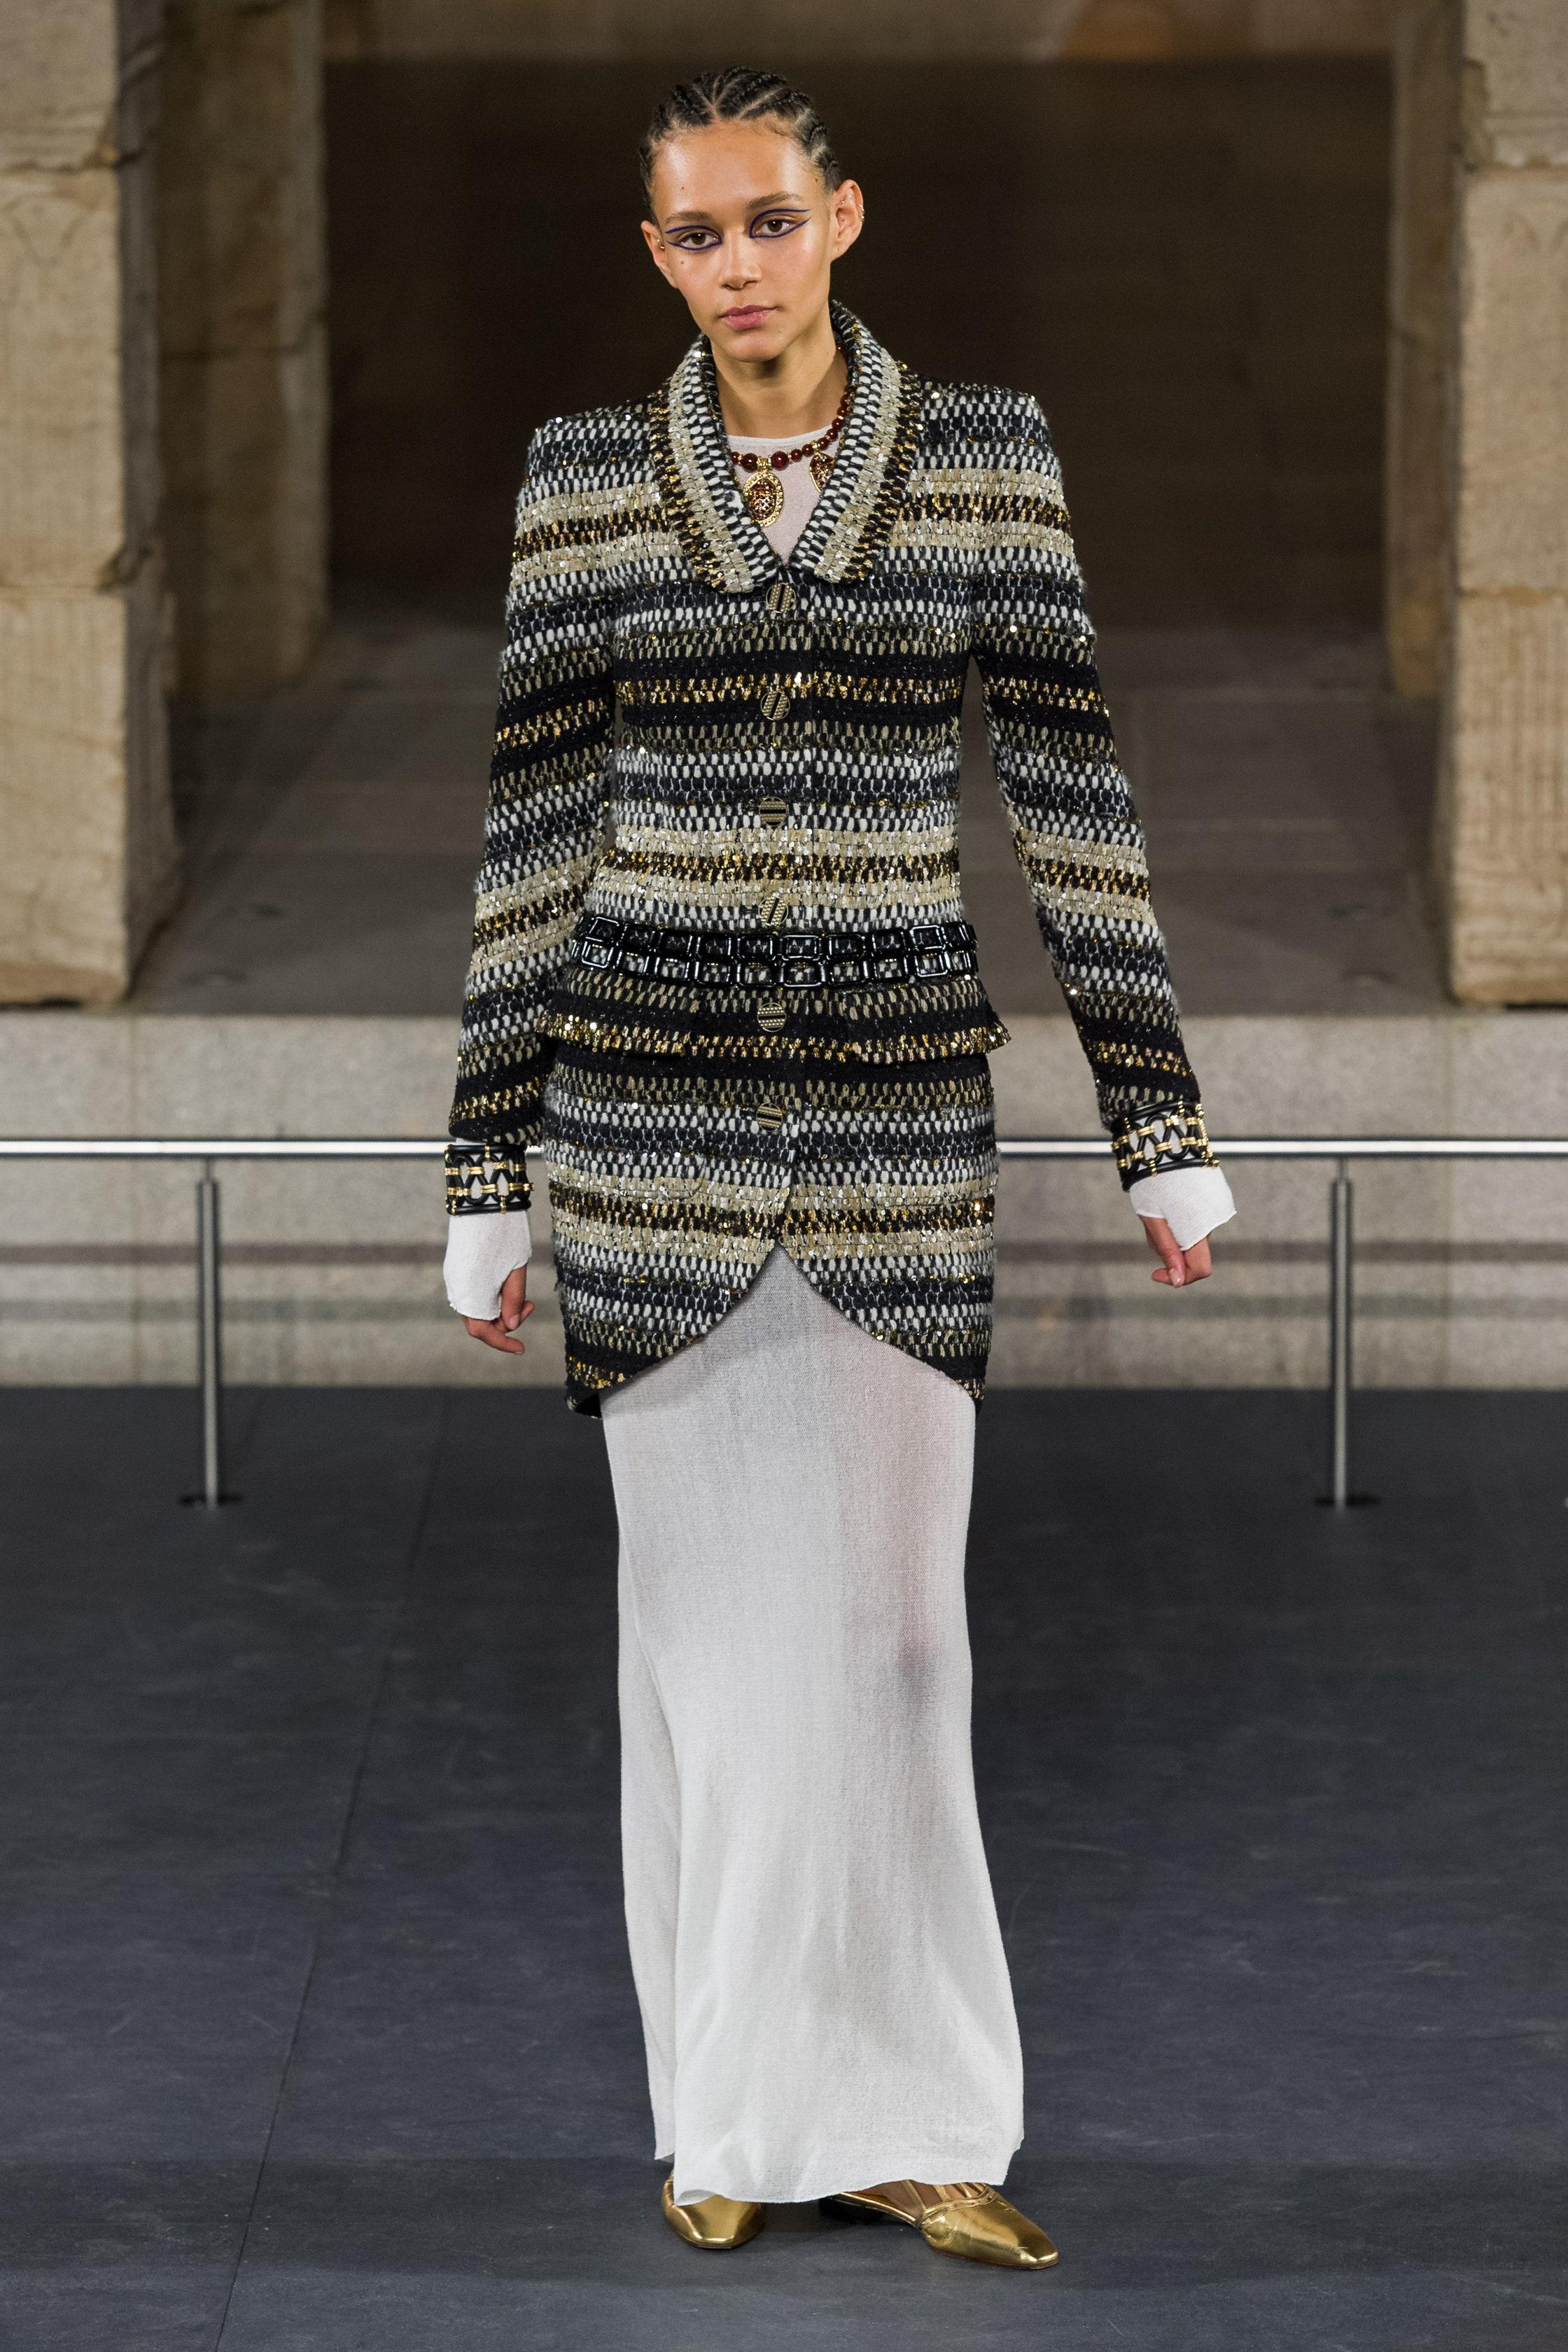 New Chanel woven tweed cardi jacket from 
Paris / New-York 2019 Pre-Fall Metiers d'Art Collection, 19A
- made of stunning woven fantasy tweed in black, beige with shimmering threads
- CC logo with symbols of Ancient Egypt (pyramids, anch,